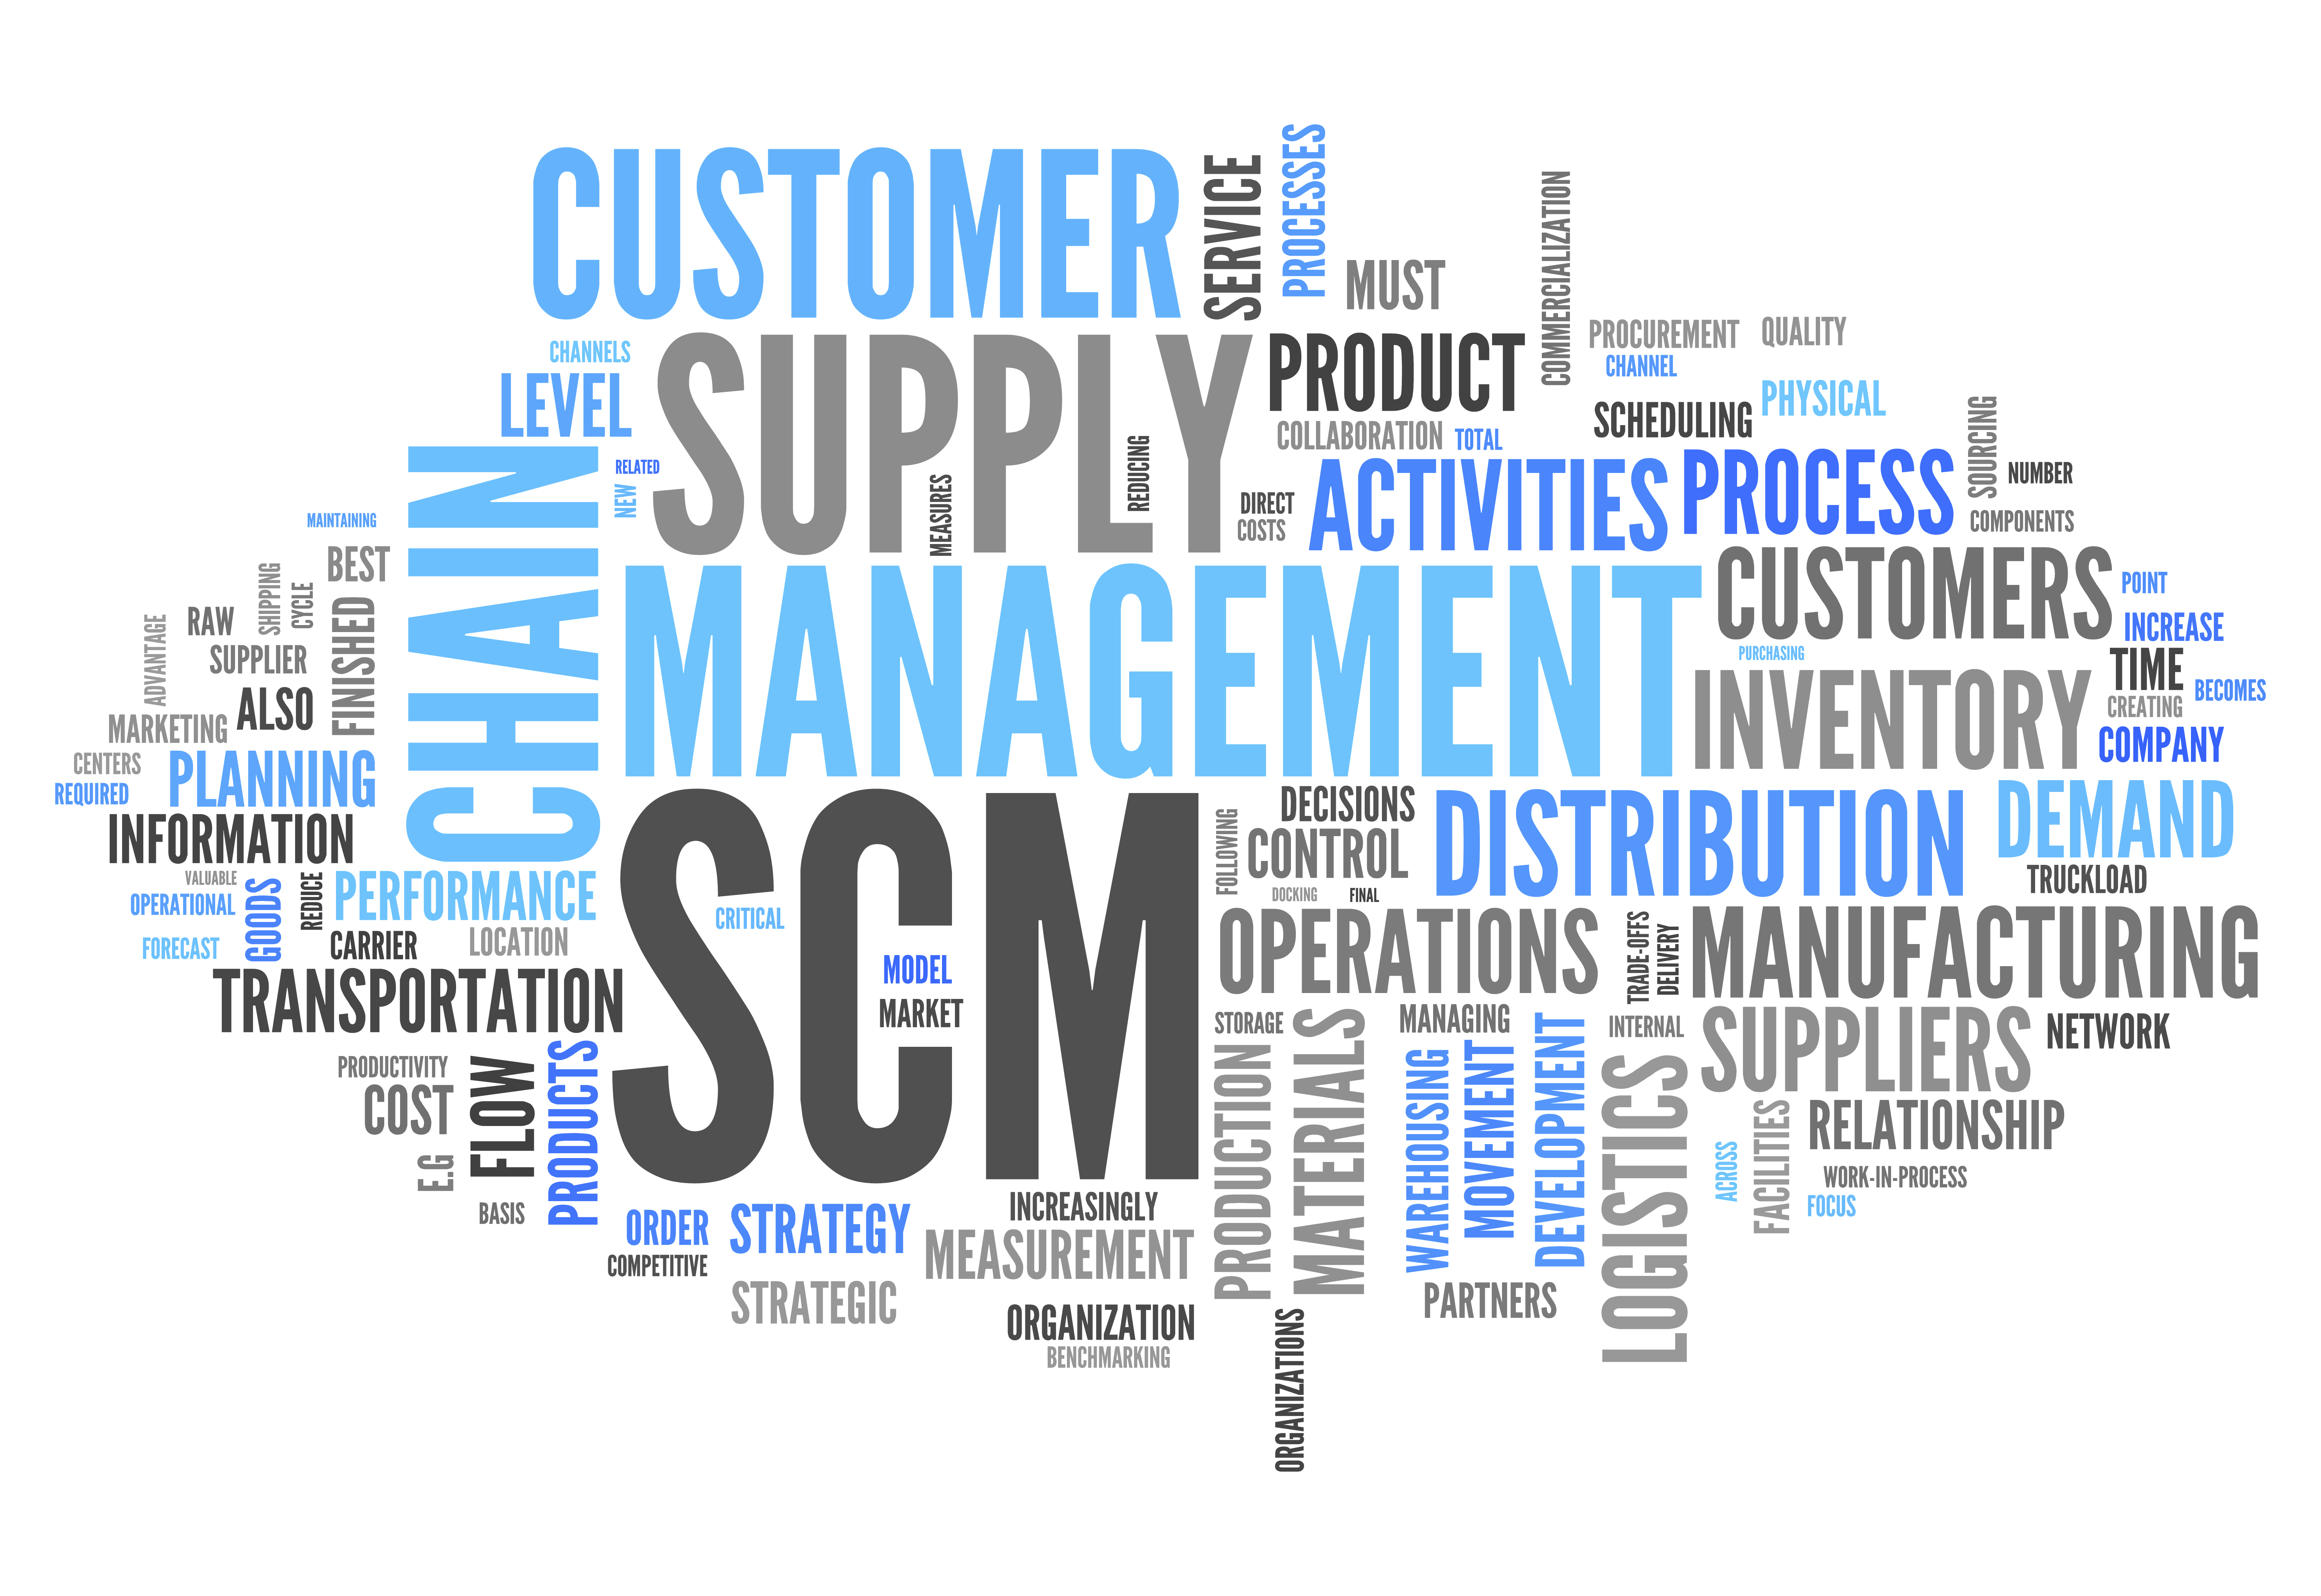 Characteristics of an Effective Supply Chain Strategy